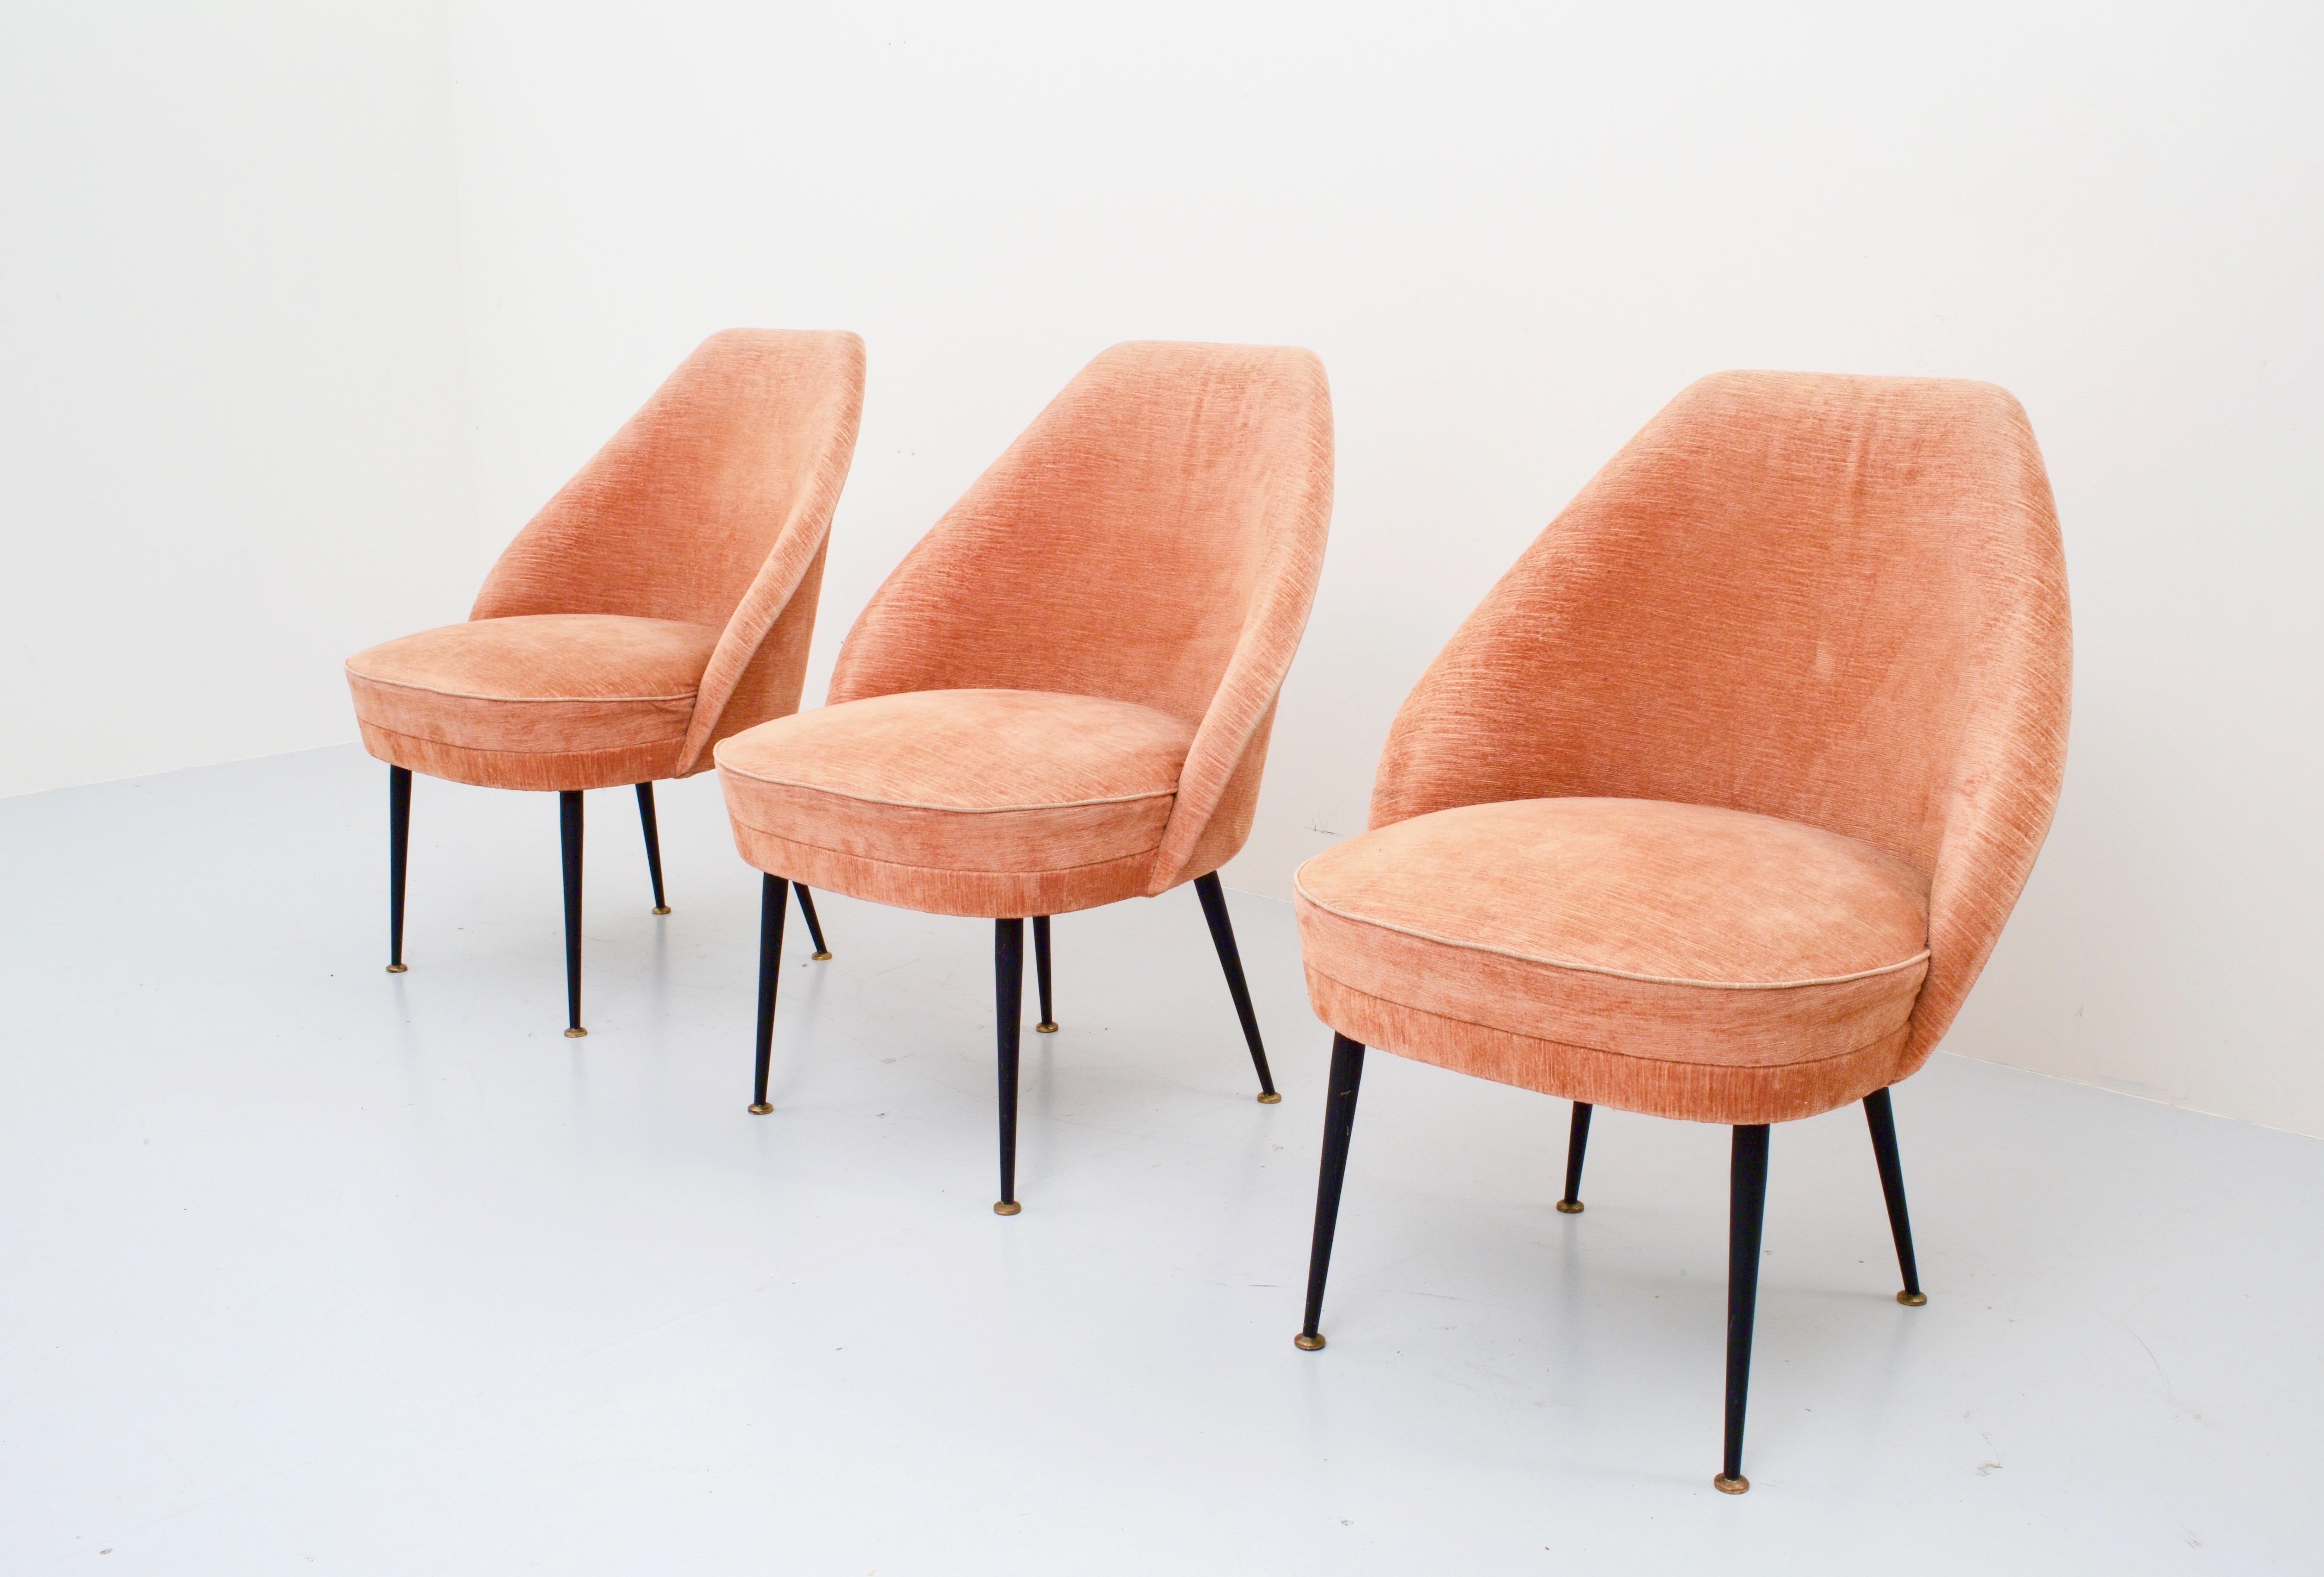 Mid-20th Century Set of Three Lounge Chairs in Pink Velvet by Carlo Pagano for Arflex, Italy 1952 For Sale